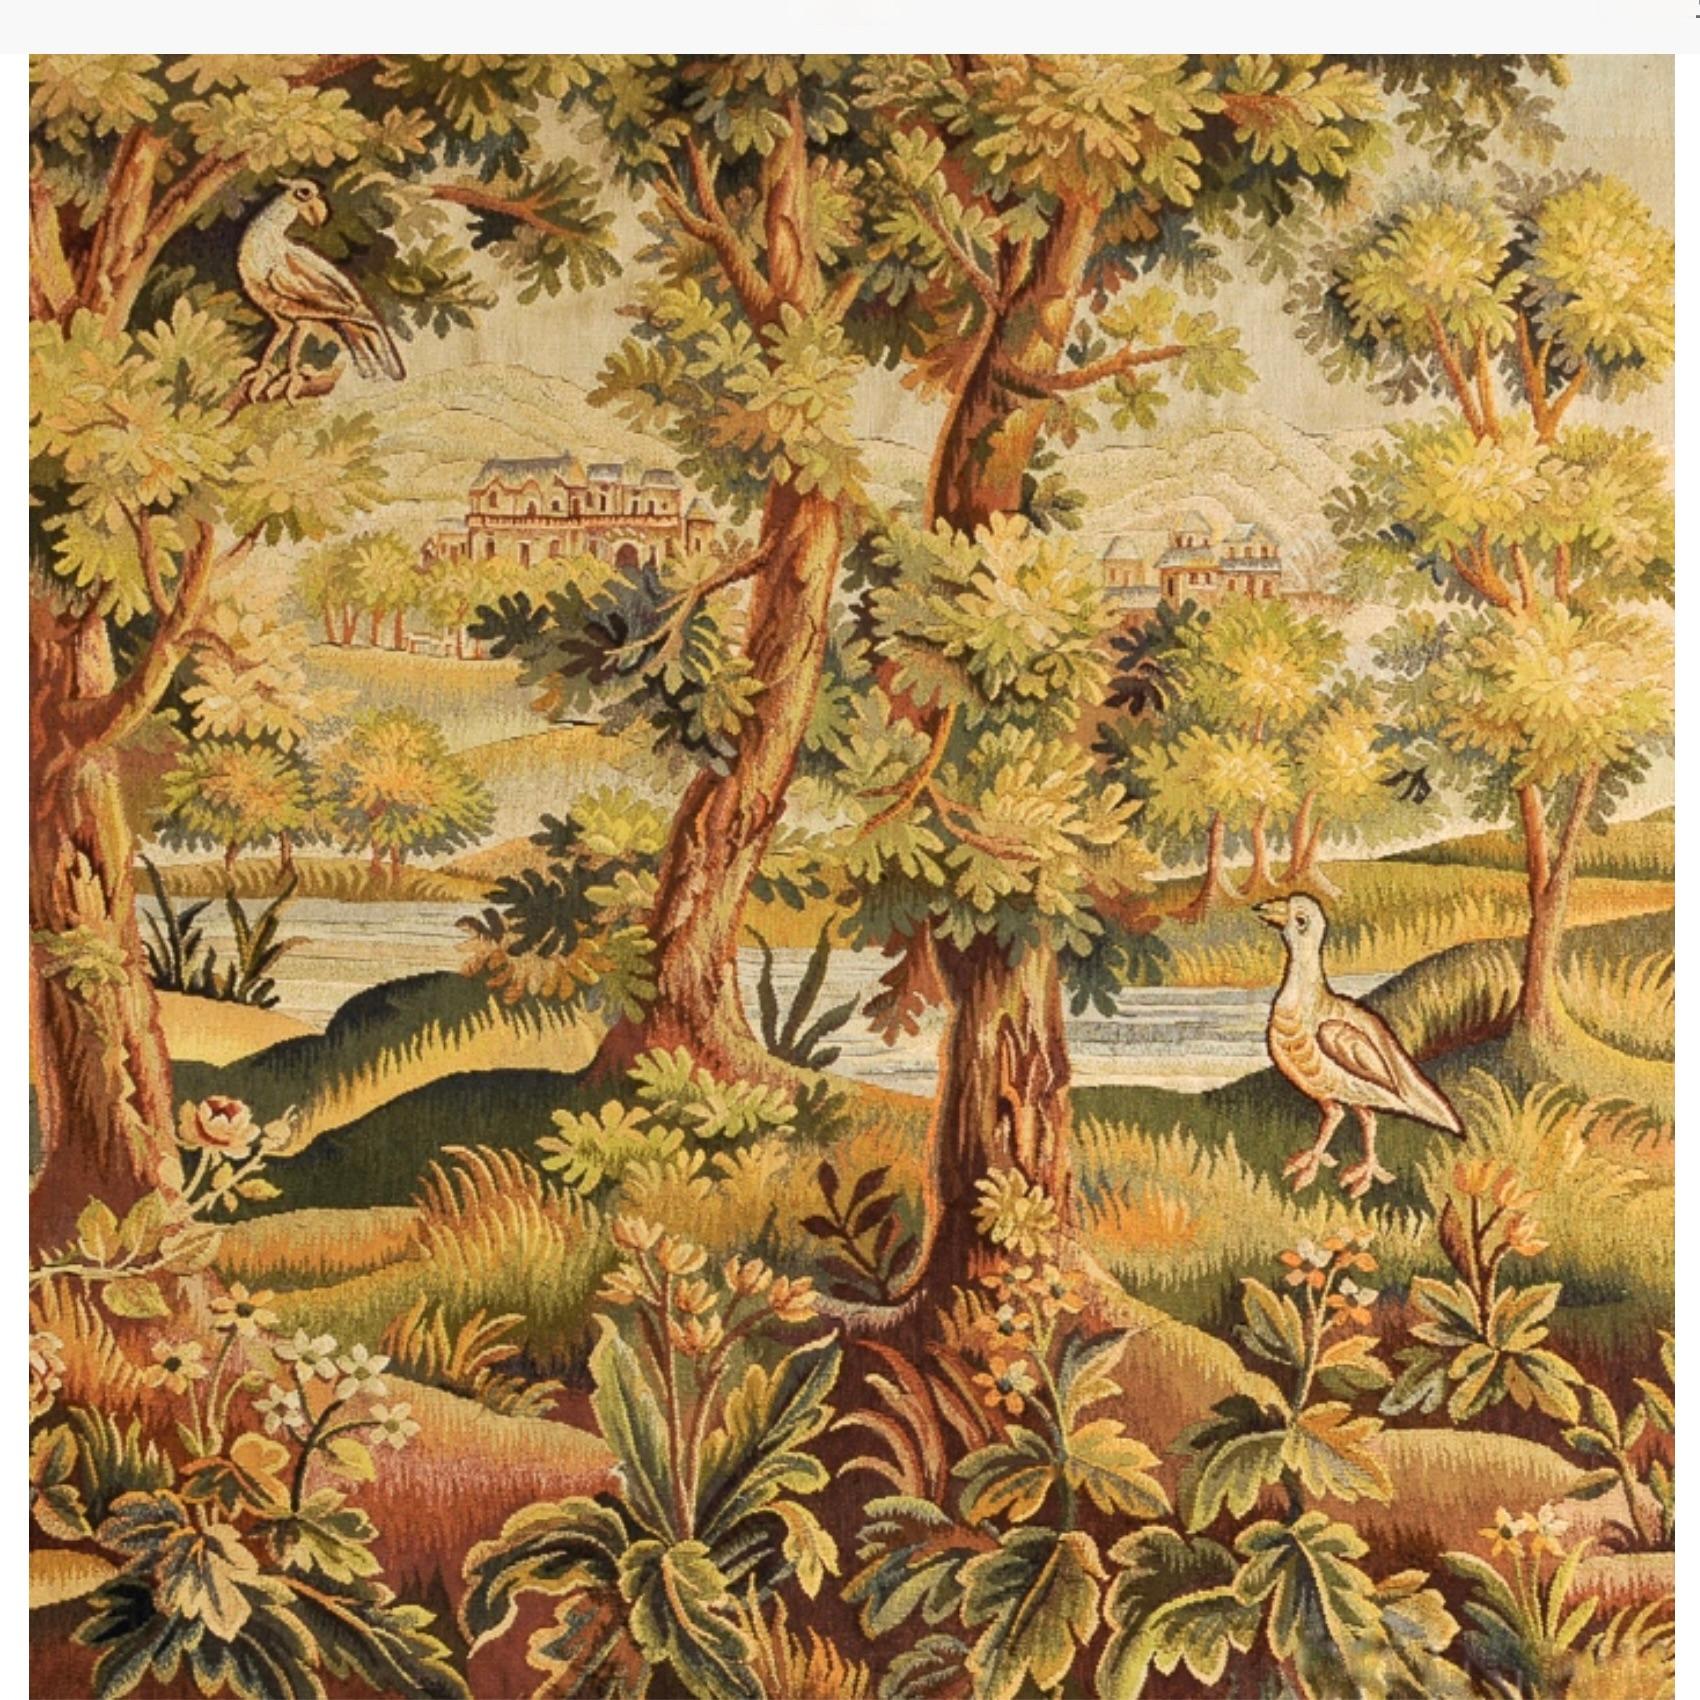 A fine landscape tapestry executed in wool and silk, depicting a leafy view over a river bank through large trees to a clearing beyond containing two castle vignettes. Dark blue/black borders frame the scene simply and attractively. The tapestry is